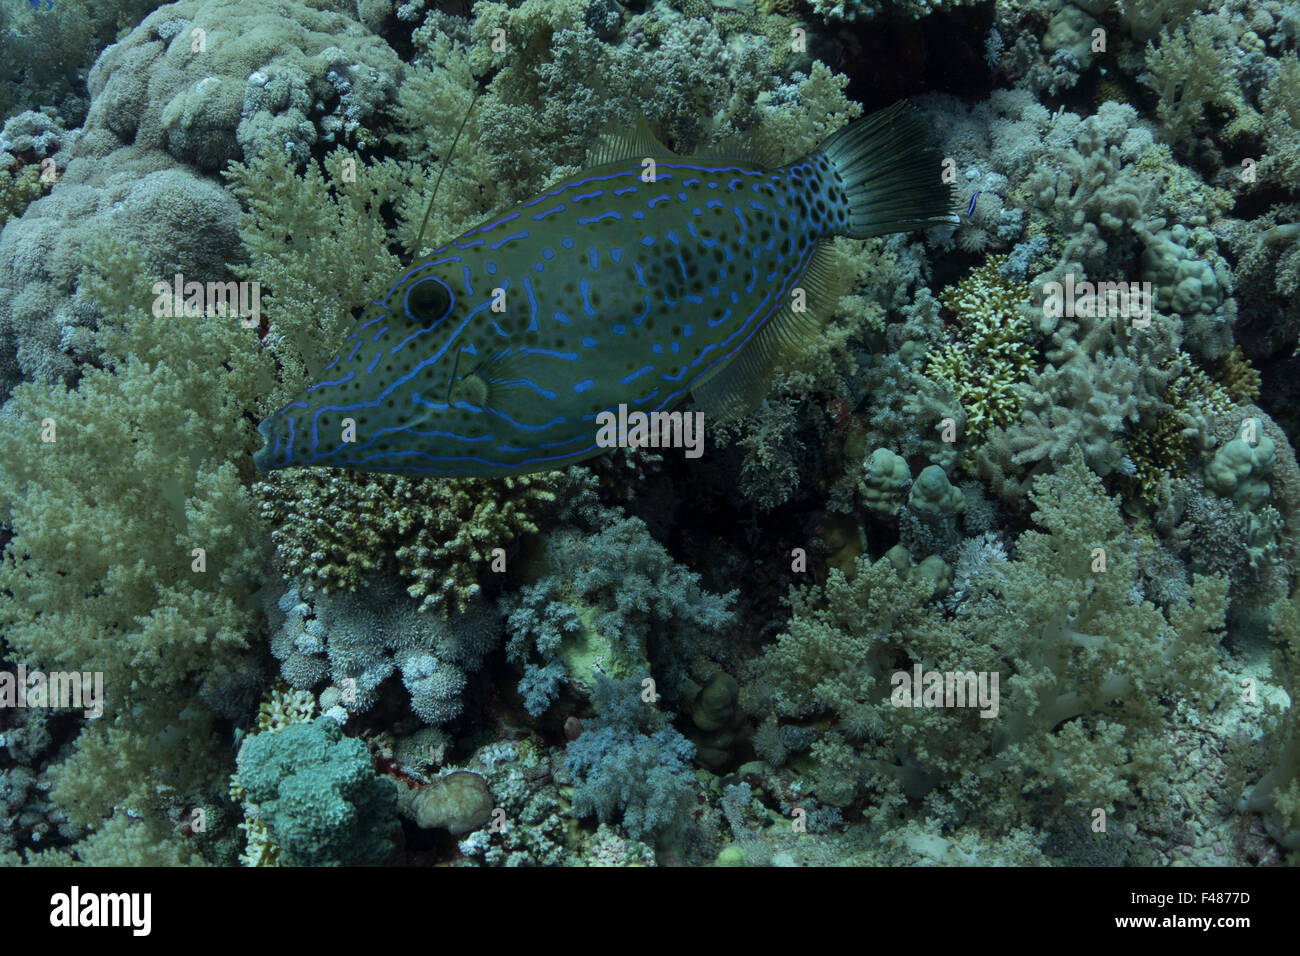 Aluterus scriptus,known as scrawled filefish is a common reef fish in the Red Sea, Egypt. Stock Photo